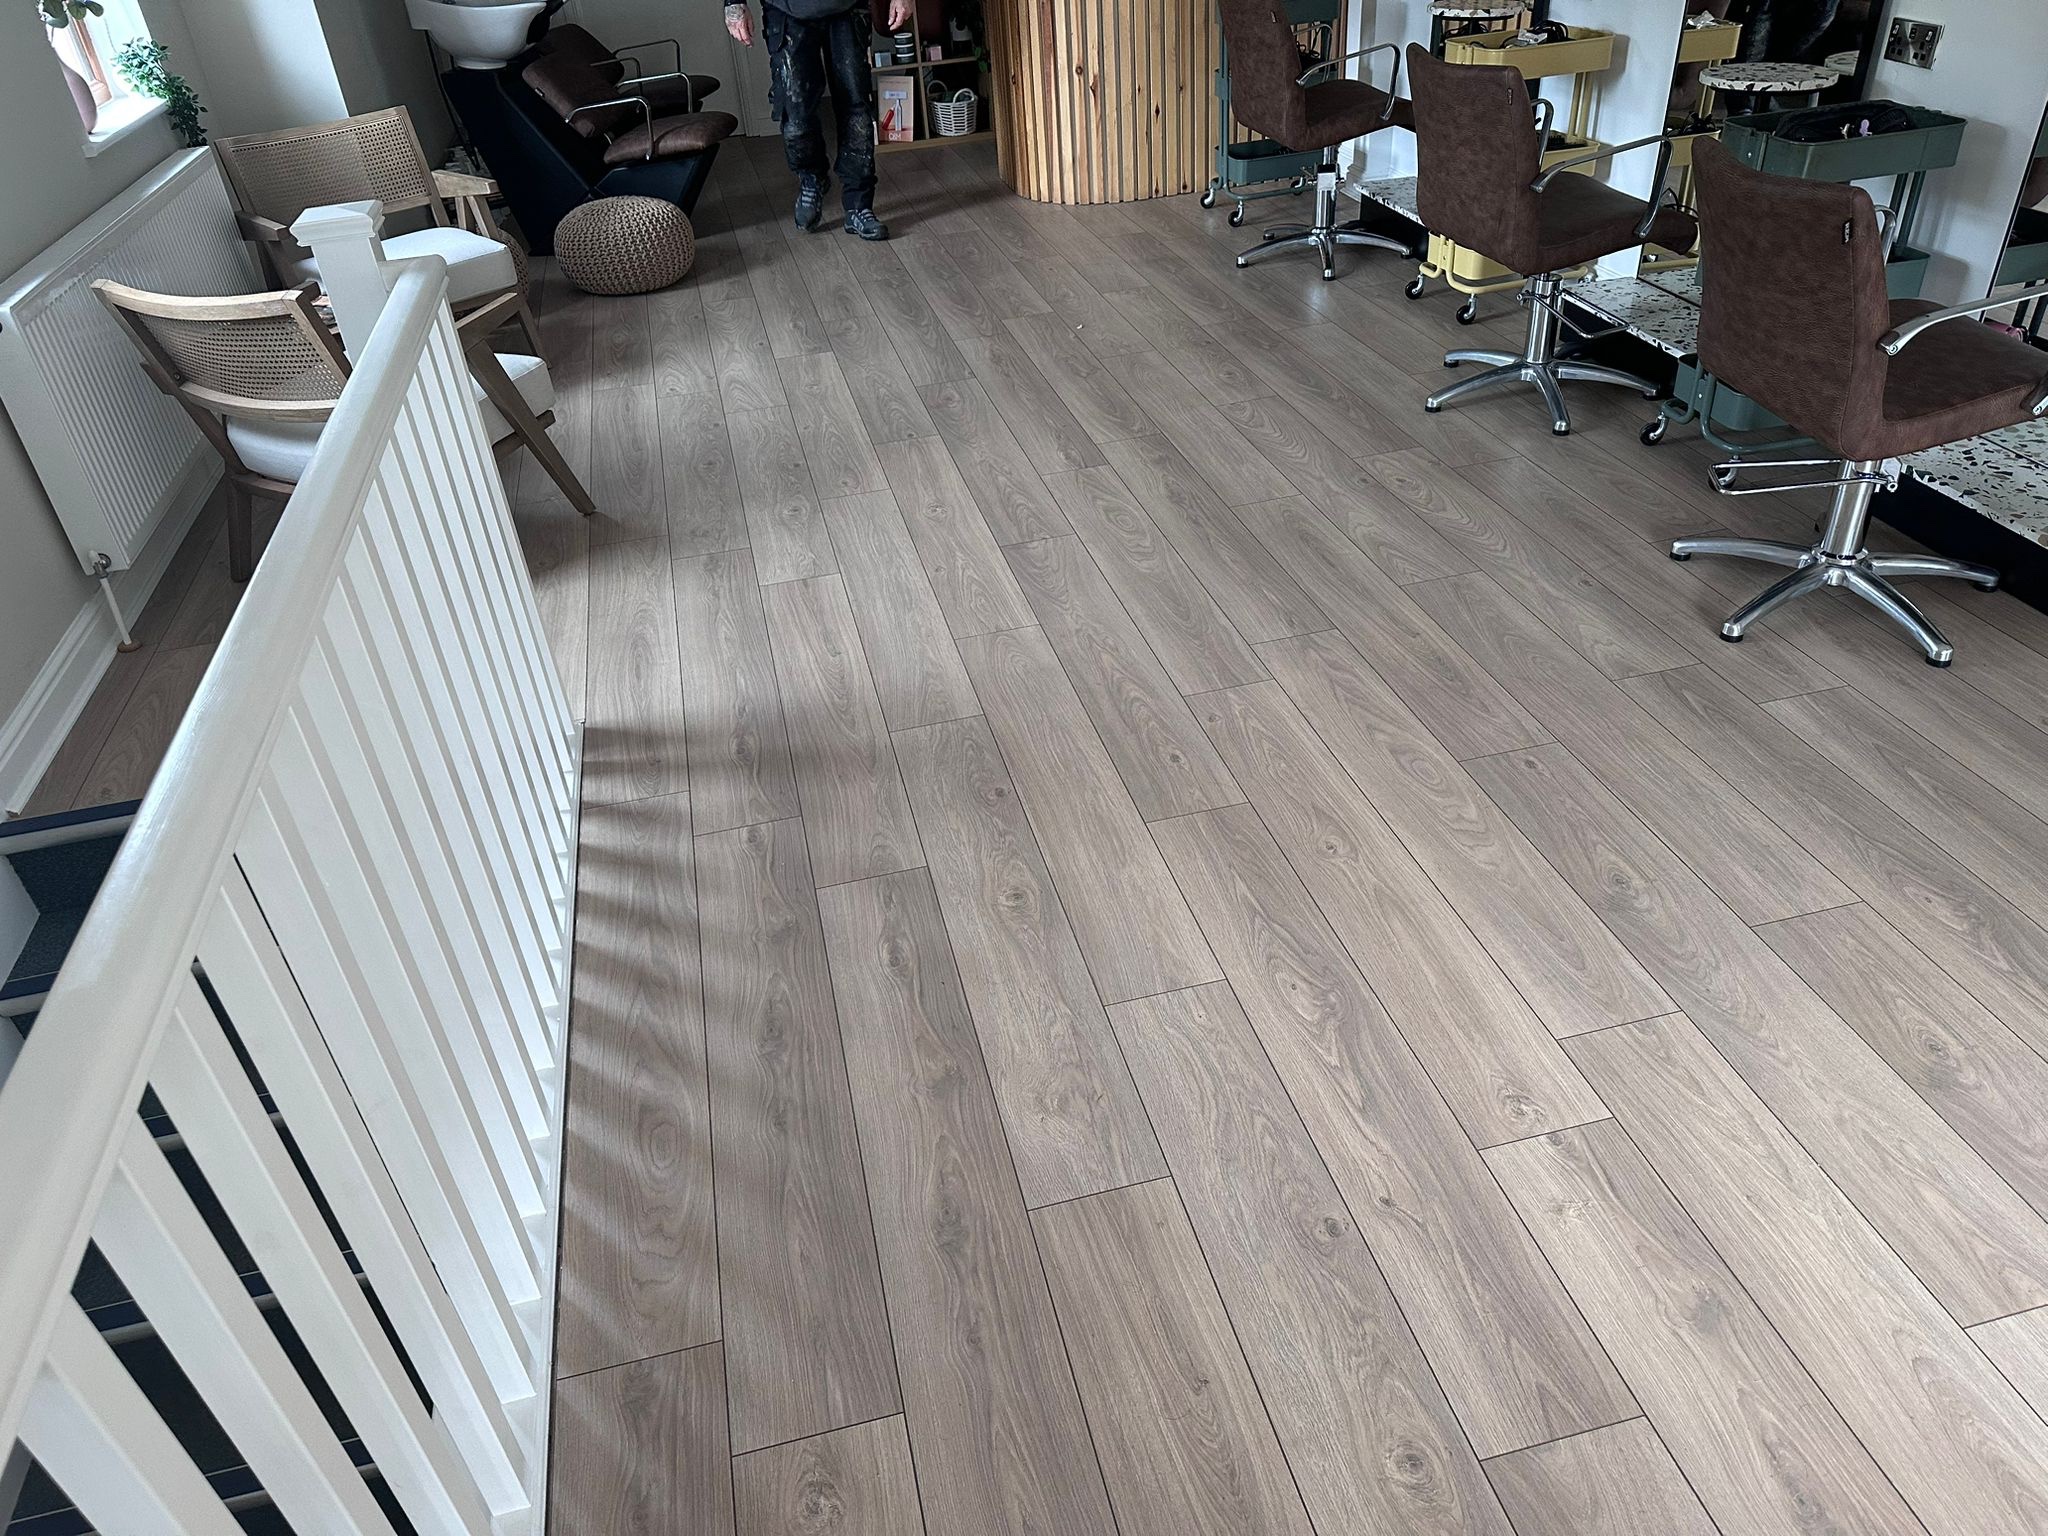 New Laminate Flooring Installed at Kelly Hughes Hair & Beauty in Whalley, Ribble Valley